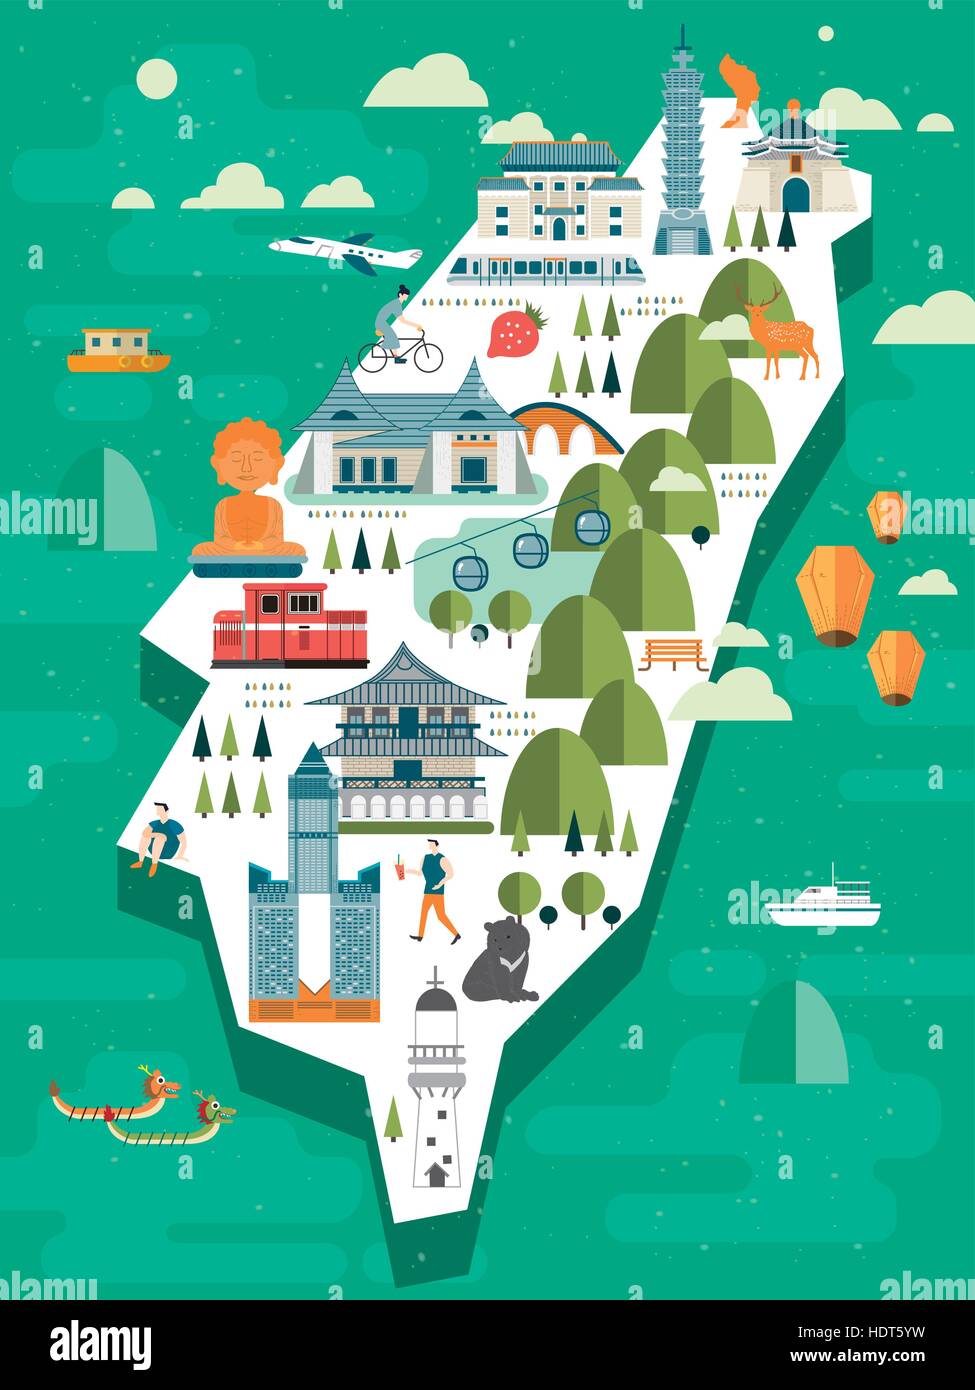 lovely Taiwan travel map design in flat style Stock Vector